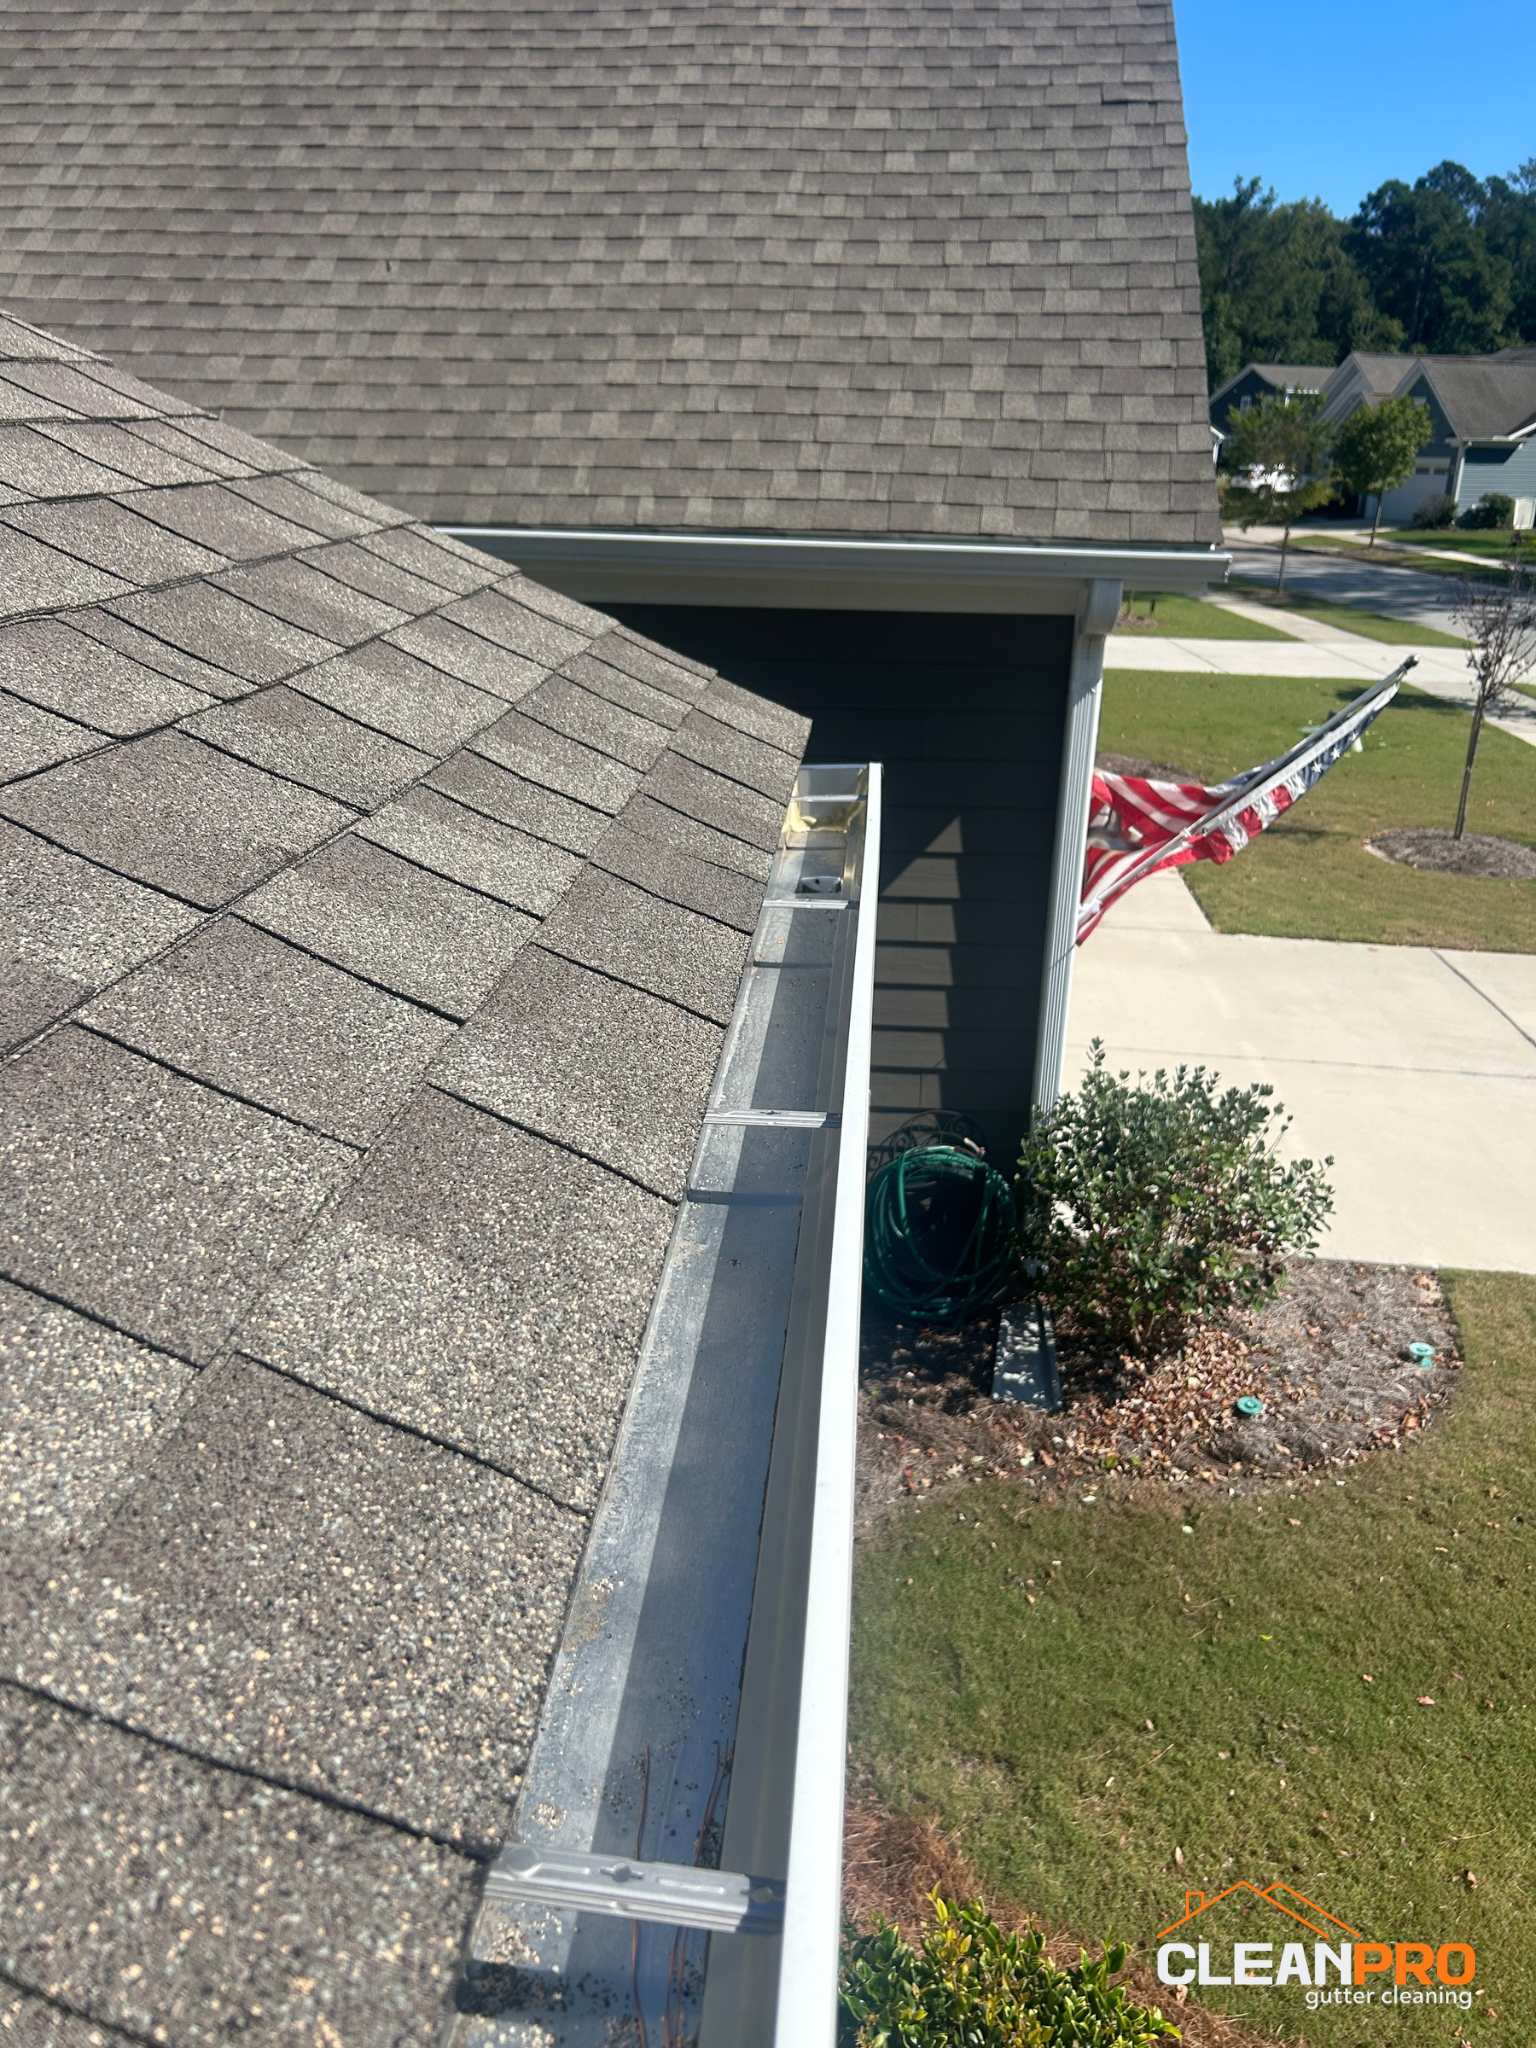 Local Gutter Cleaning in Alexandria